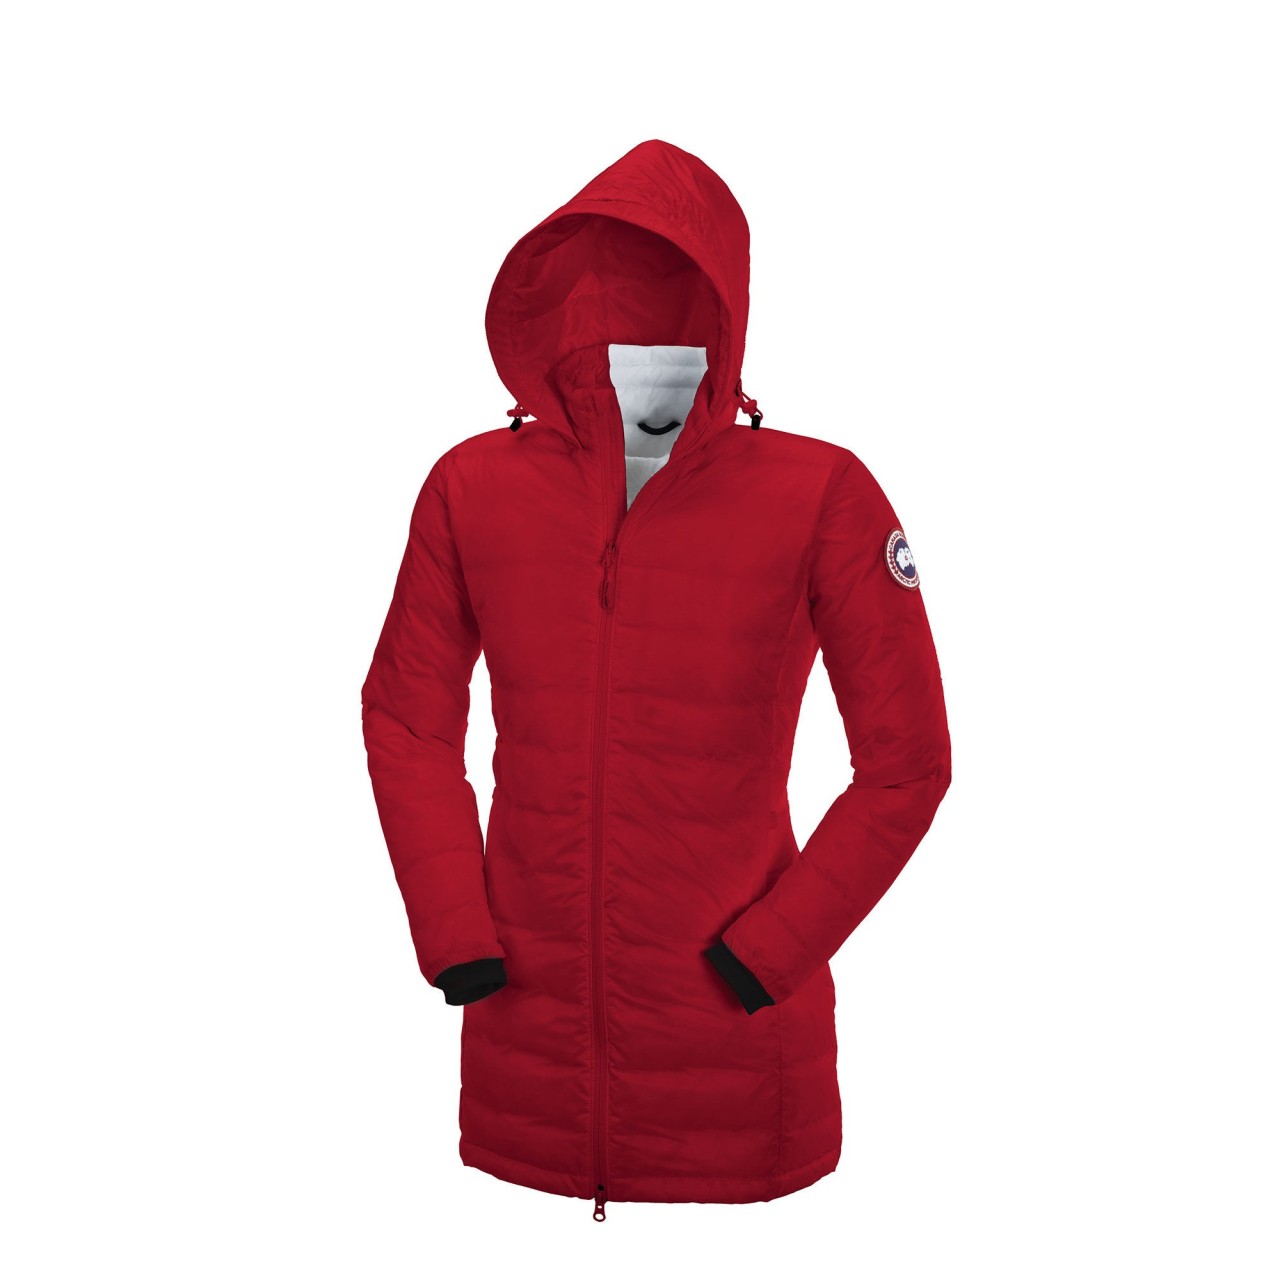 Canada Goose expedition parka sale authentic - 70% Off Cheap Canada Goose Jackets Sale